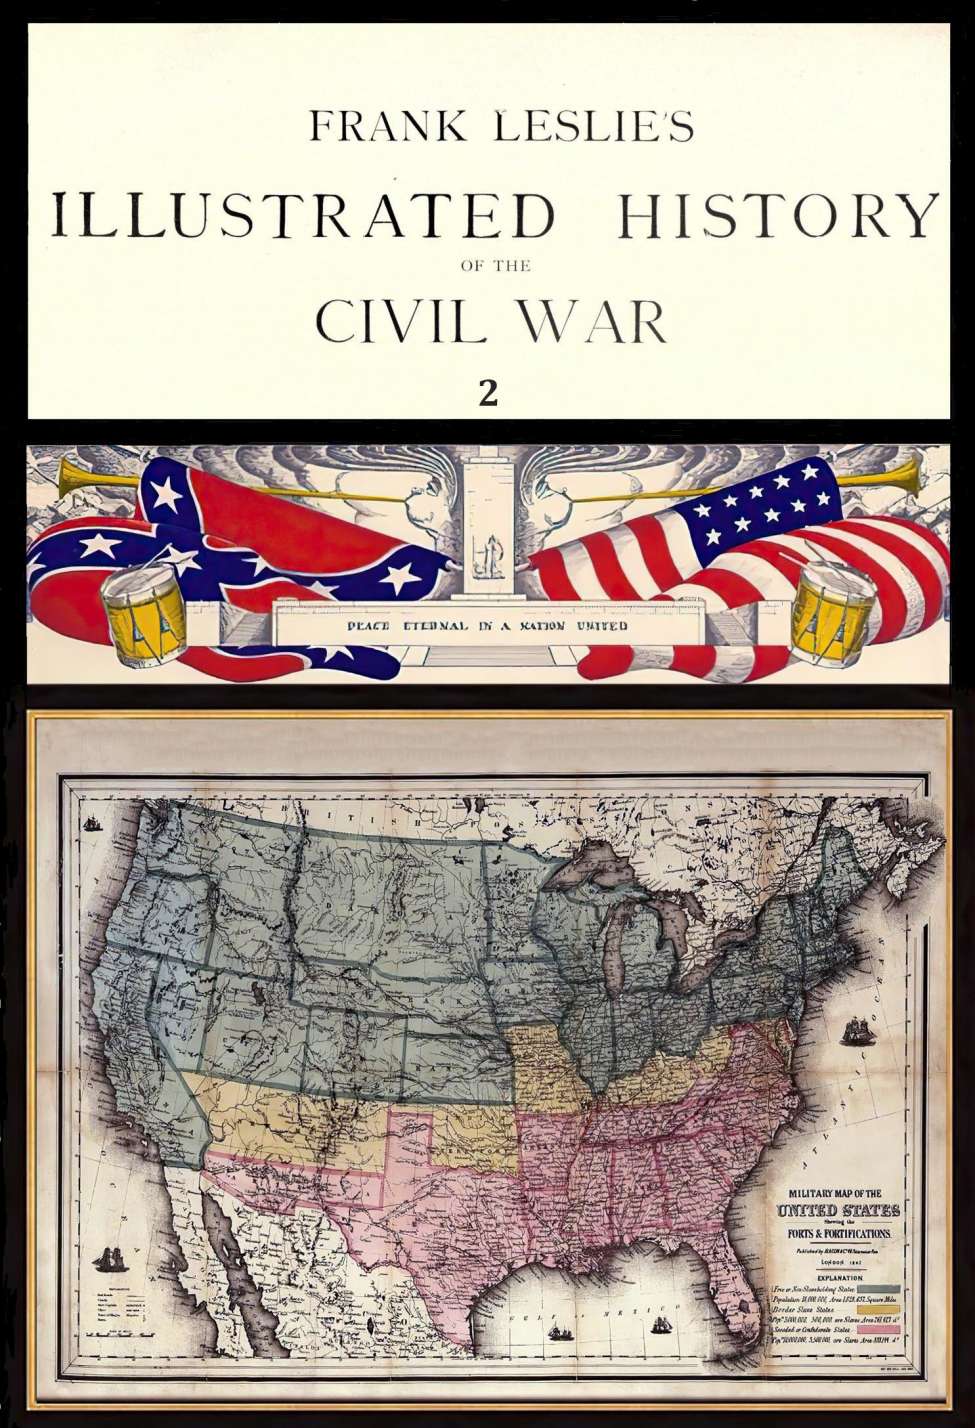 Book Cover For Frank Leslie's Illustrated History of the Civil War 2